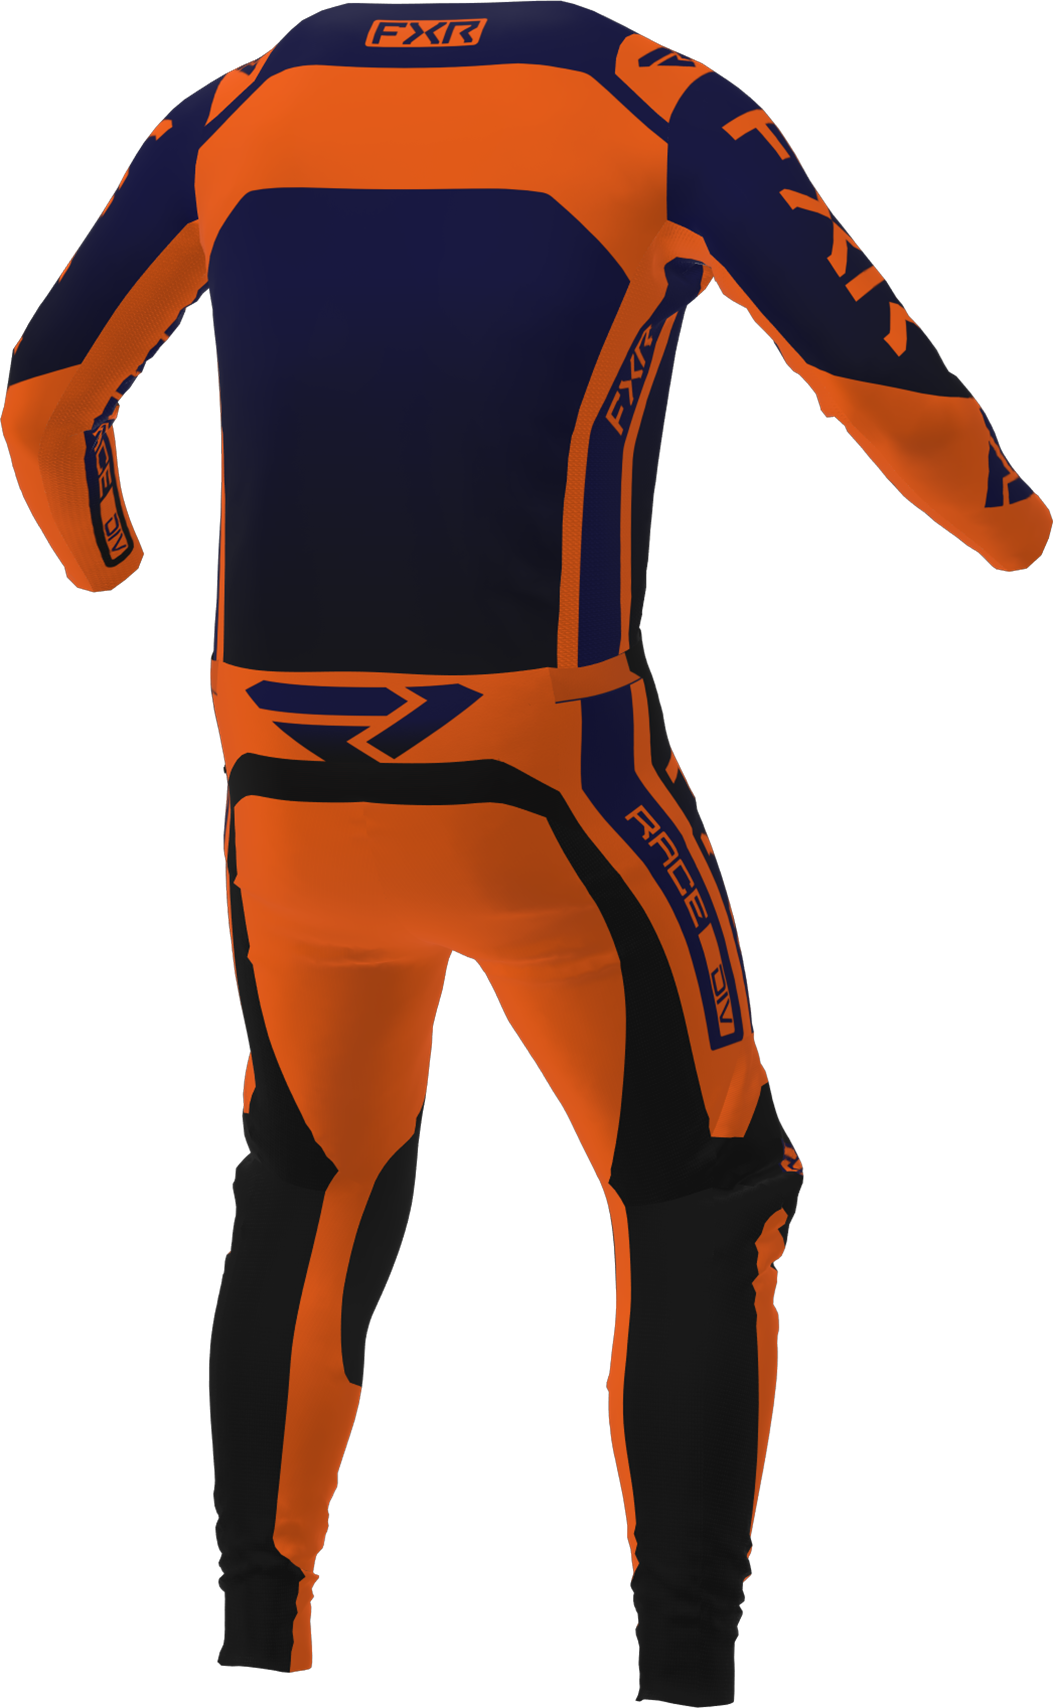 A 3D image of FXR's Contender MX Jersey and Pant in Midnight/Orange colorway